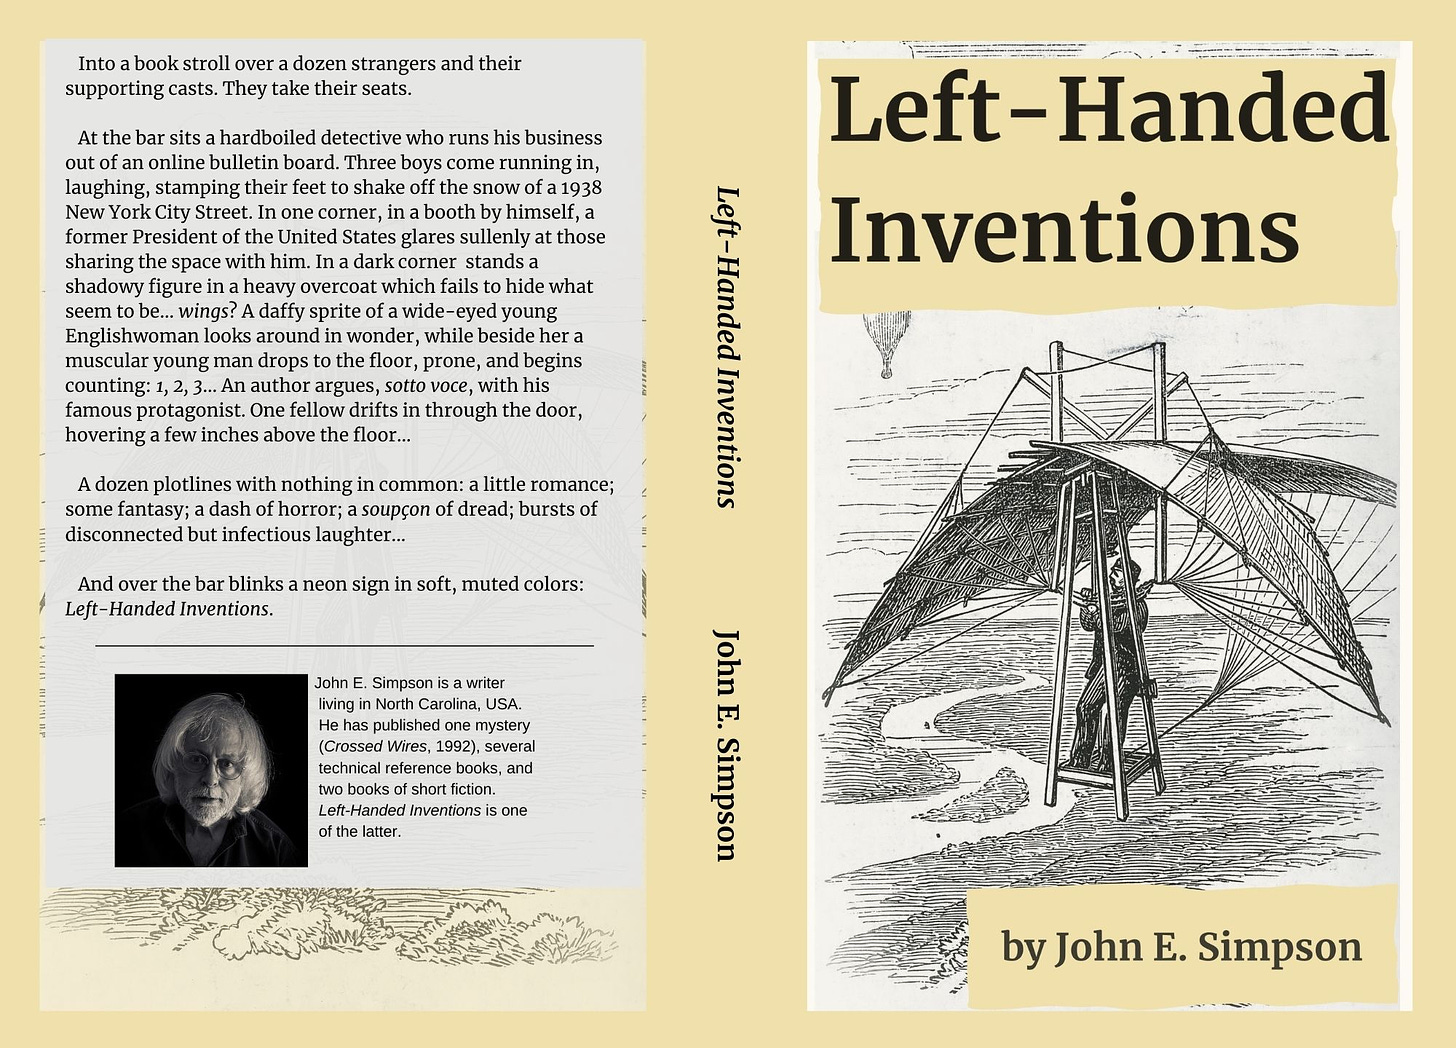 Single image depicting the cover of a book, in three sections. Left to right, they are the back cover (including a description of the contents, a photo of the author, and a brief biographical note); the spine (reading "Left-Handed Inventions" and "John E. Simpson"); and the front cover (title at the top, author's name at the bottom, and a line drawing of a man in mid-air piloting an odd -- and probably dangerous -- 19th-century flying machine).